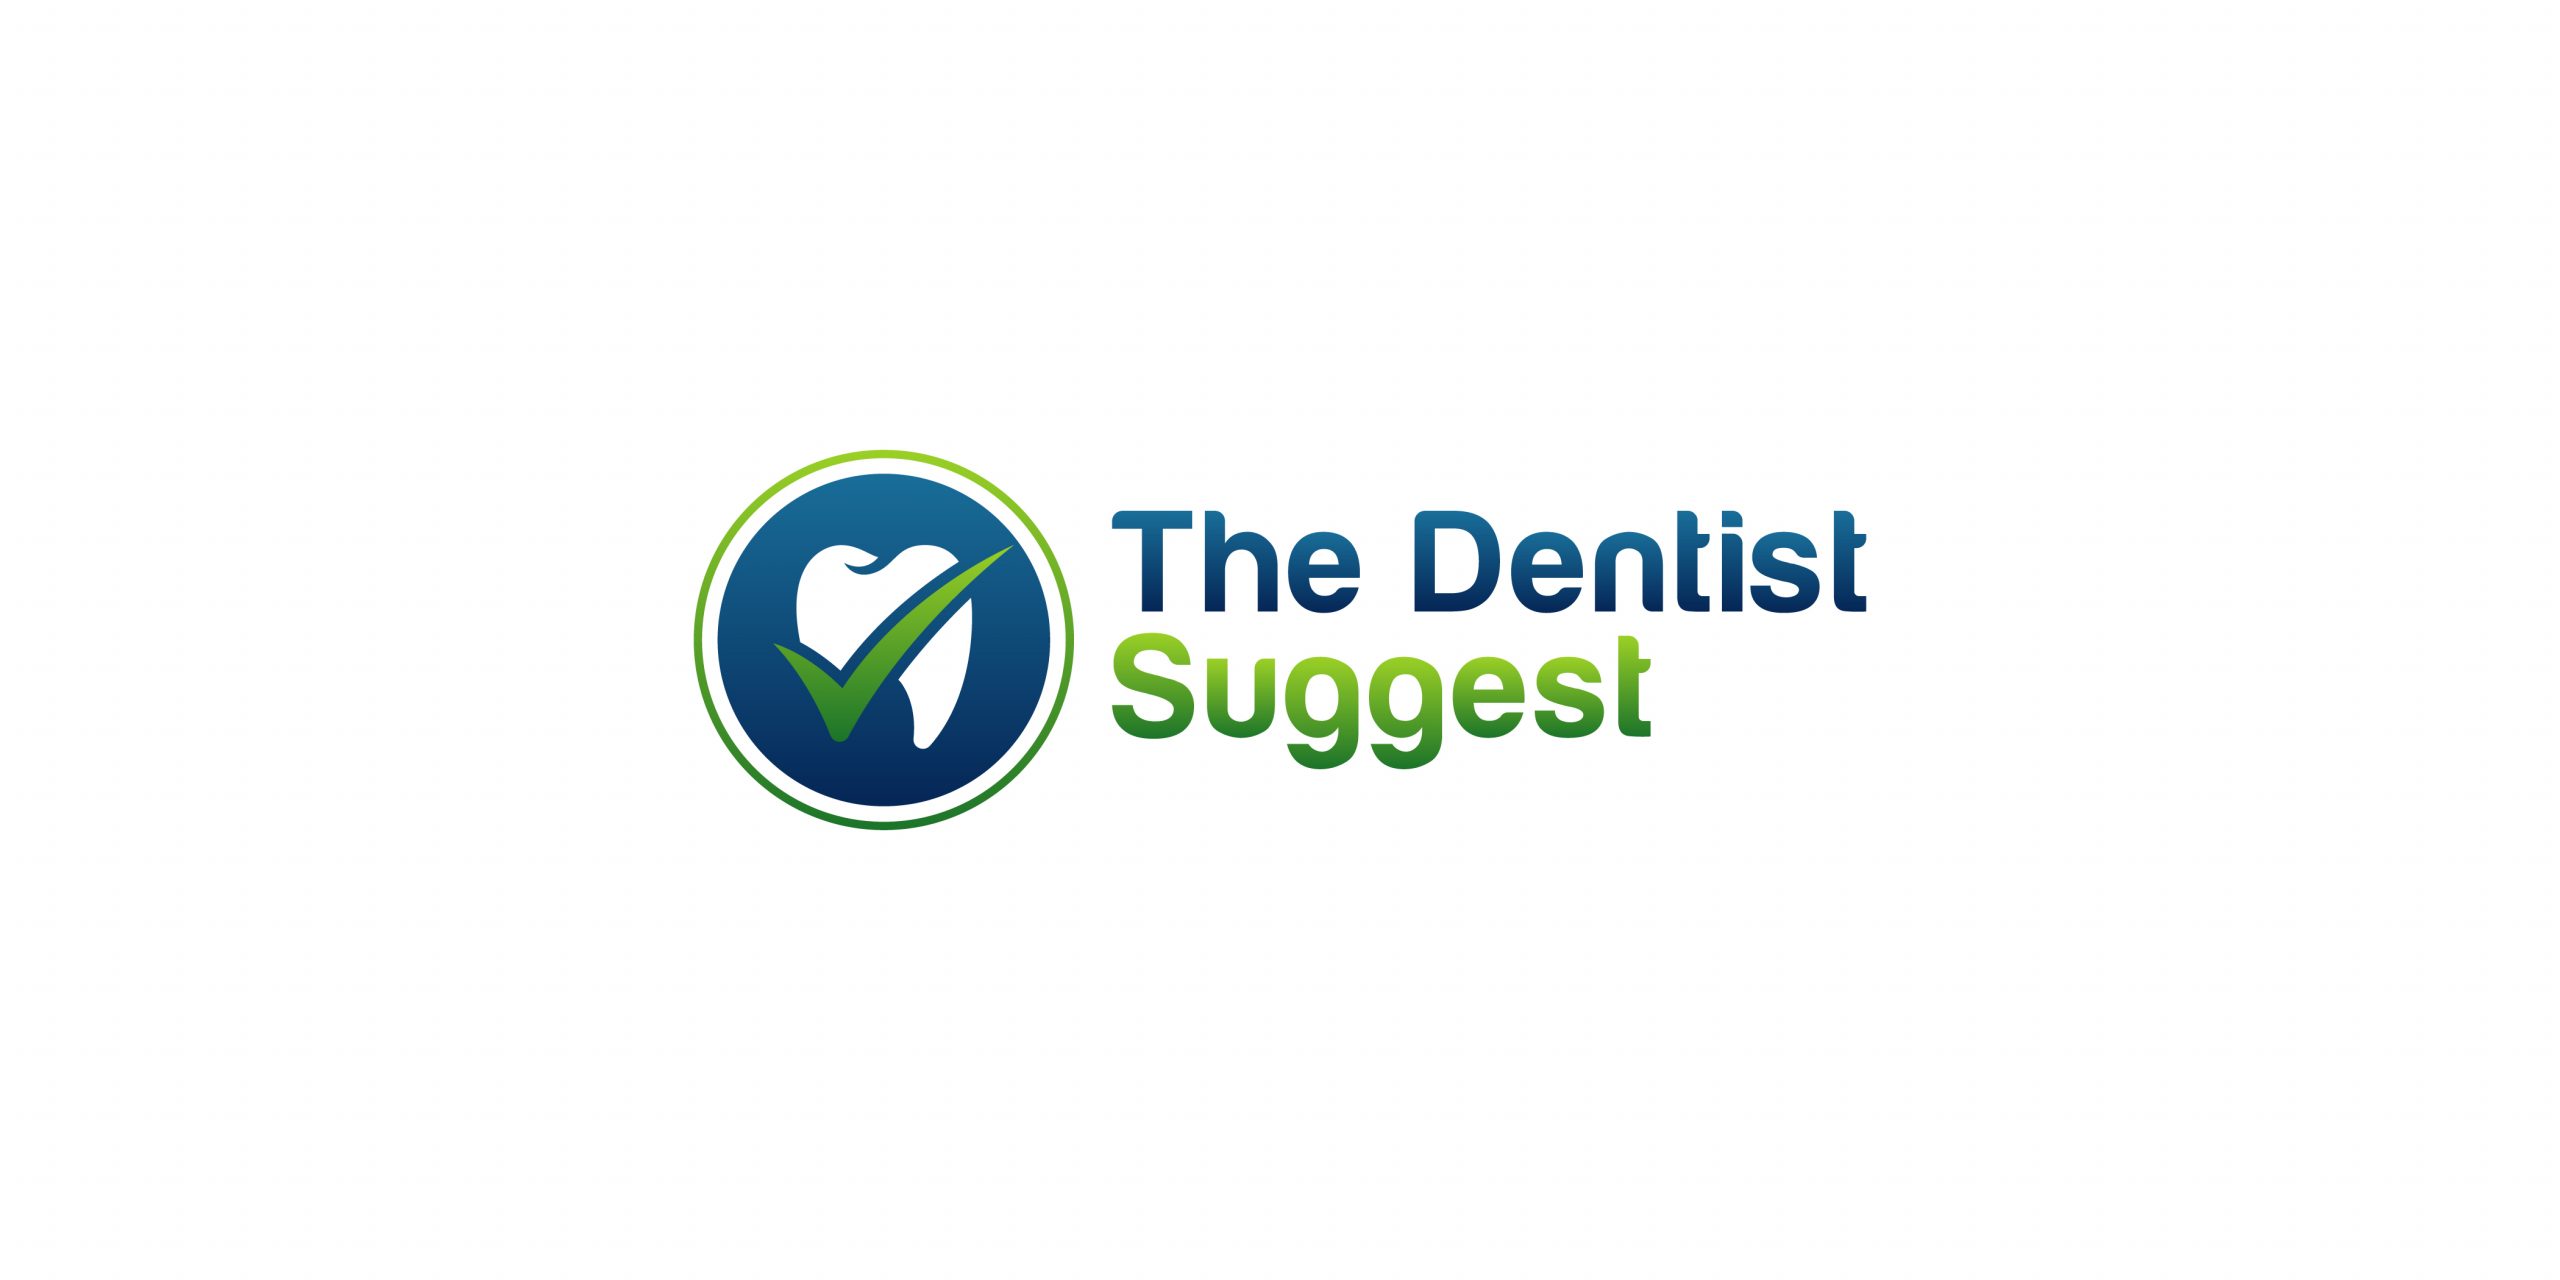 The Dentist Suggest